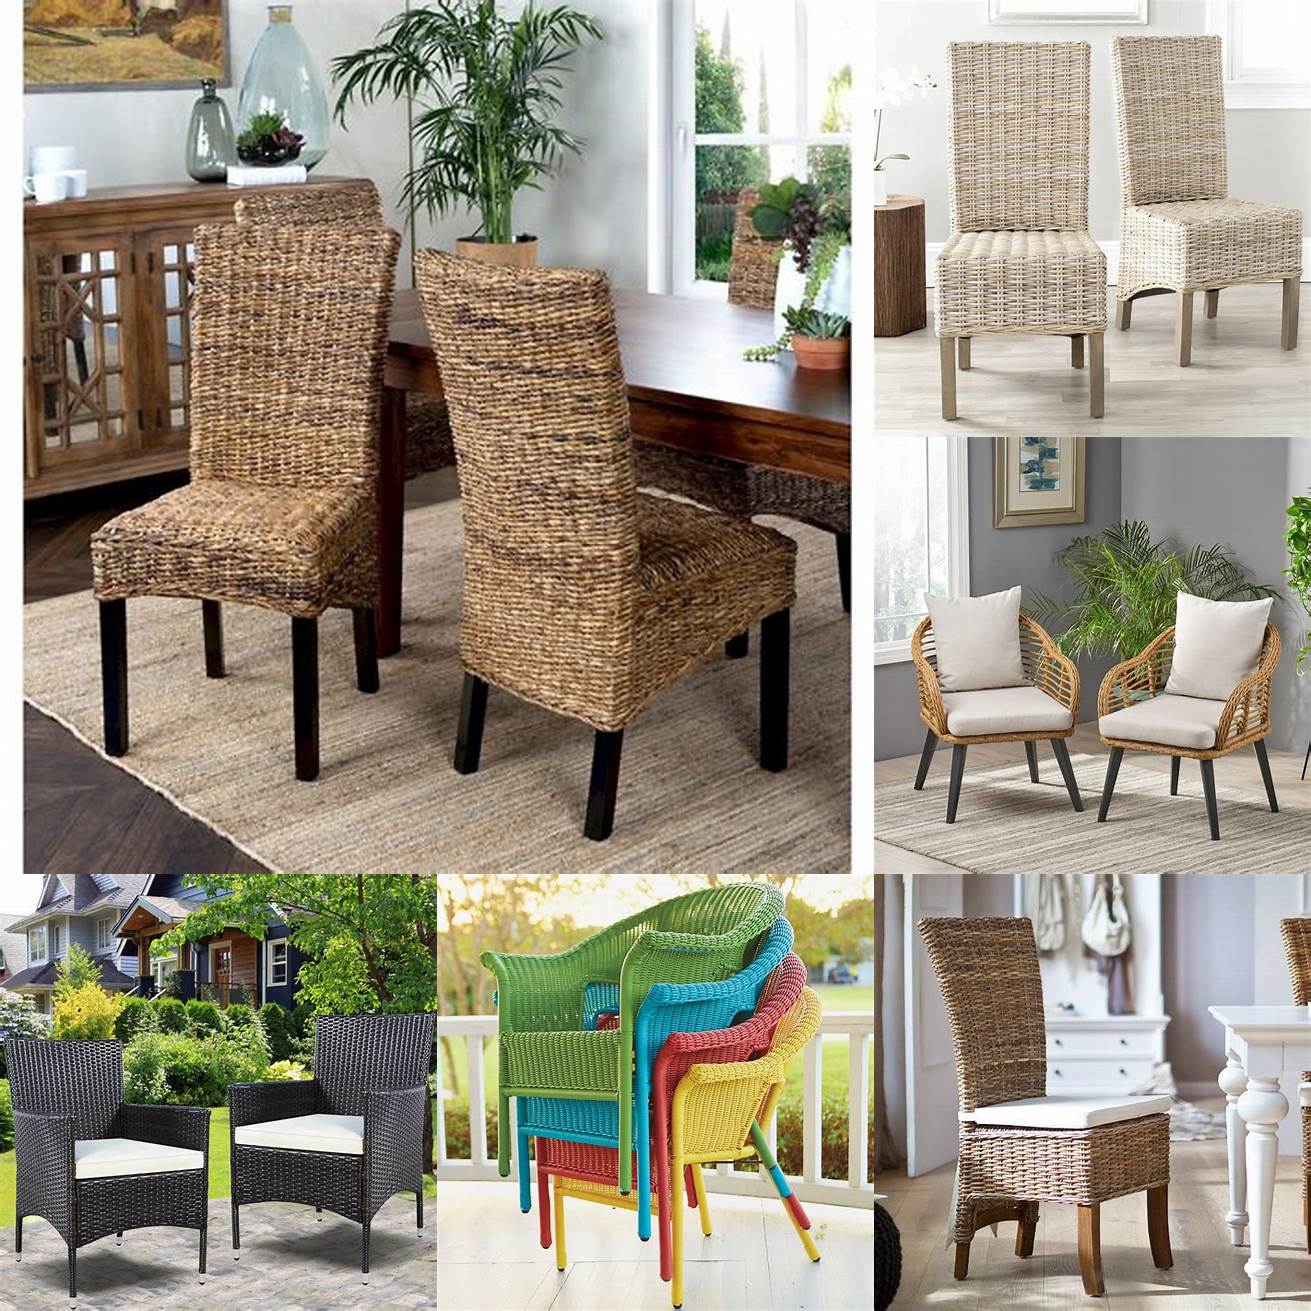 3 Wicker dining chairs with colorful cushions